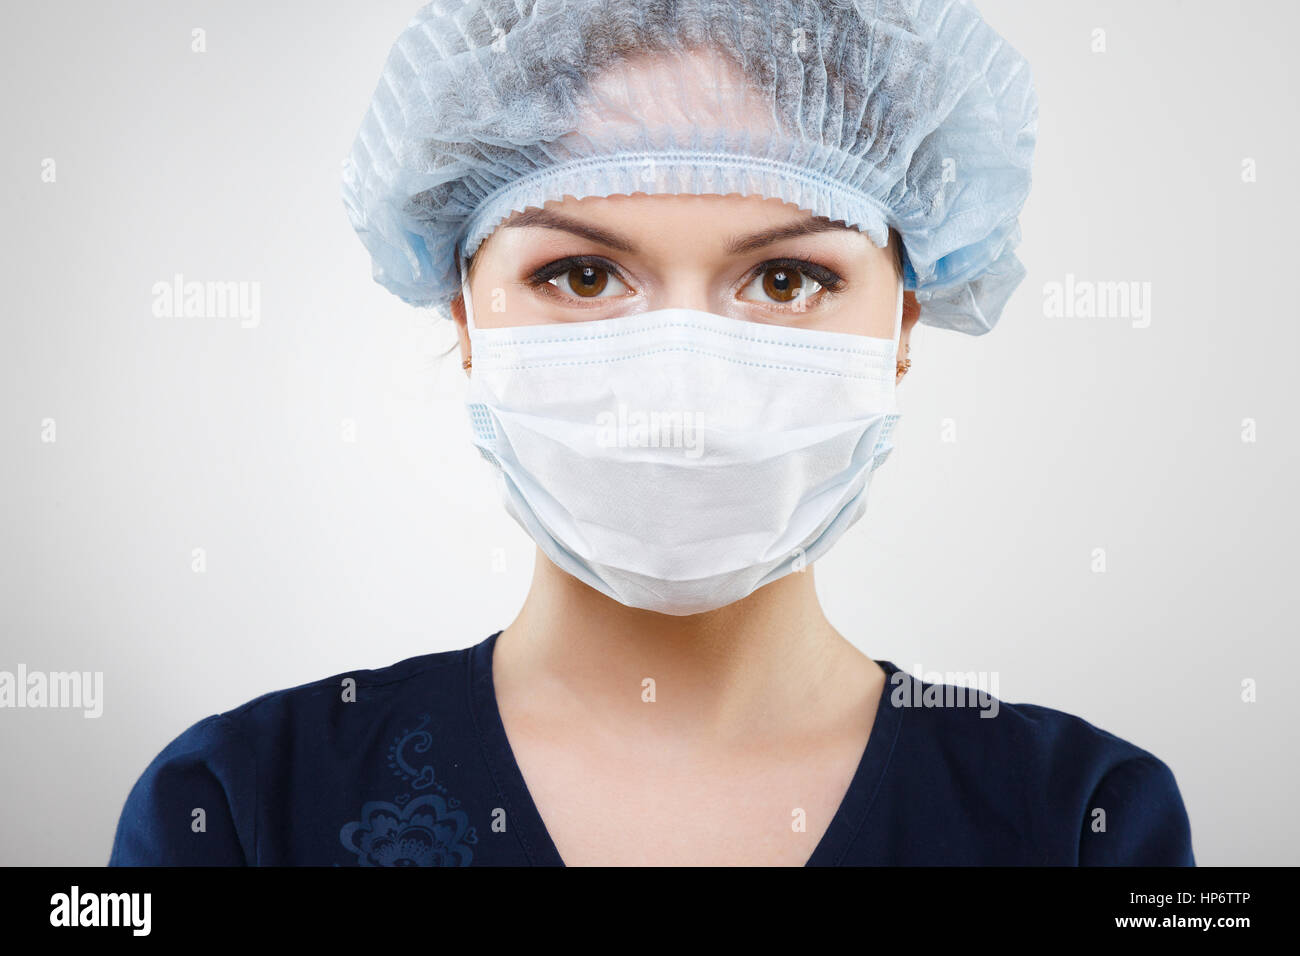 Surgeon wearing plastic face mask - Stock Image - M550/0408 - Science Photo  Library